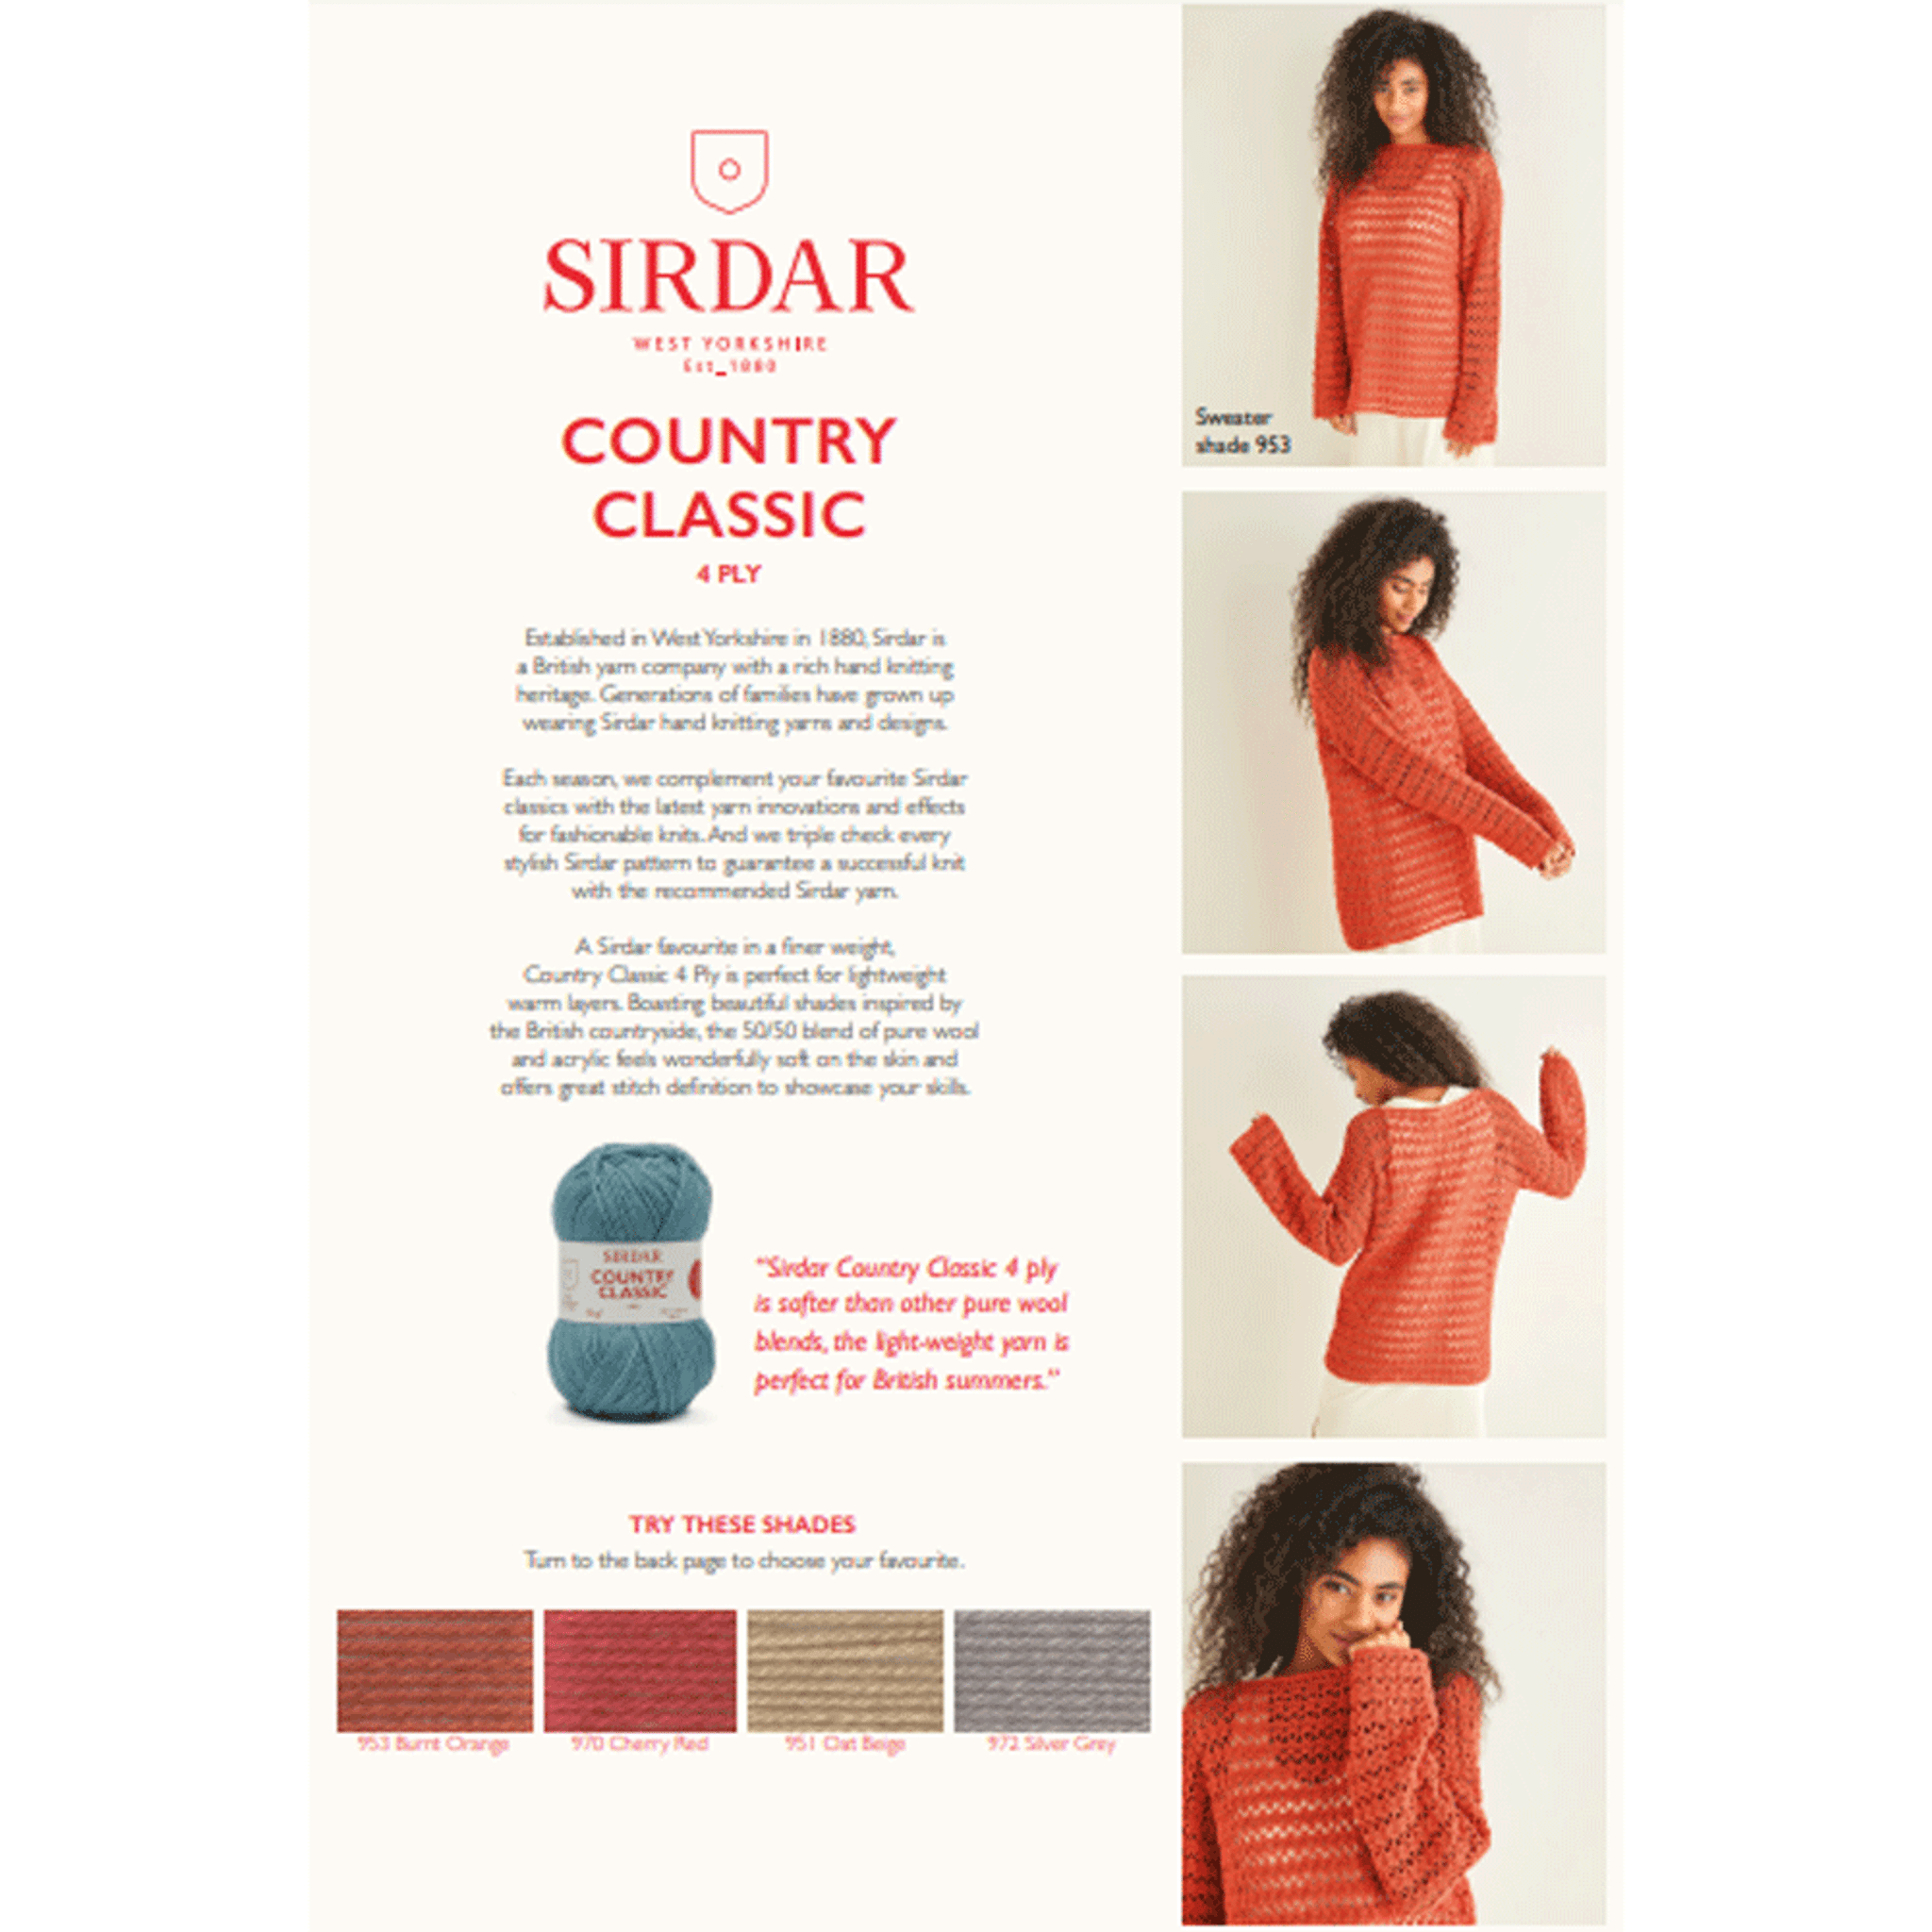 Ladies Boat Neck Tunic Crochet Pattern | Sirdar Country Classic 4 Ply 10244  | Digital Download | Digital Download | Outback Yarns